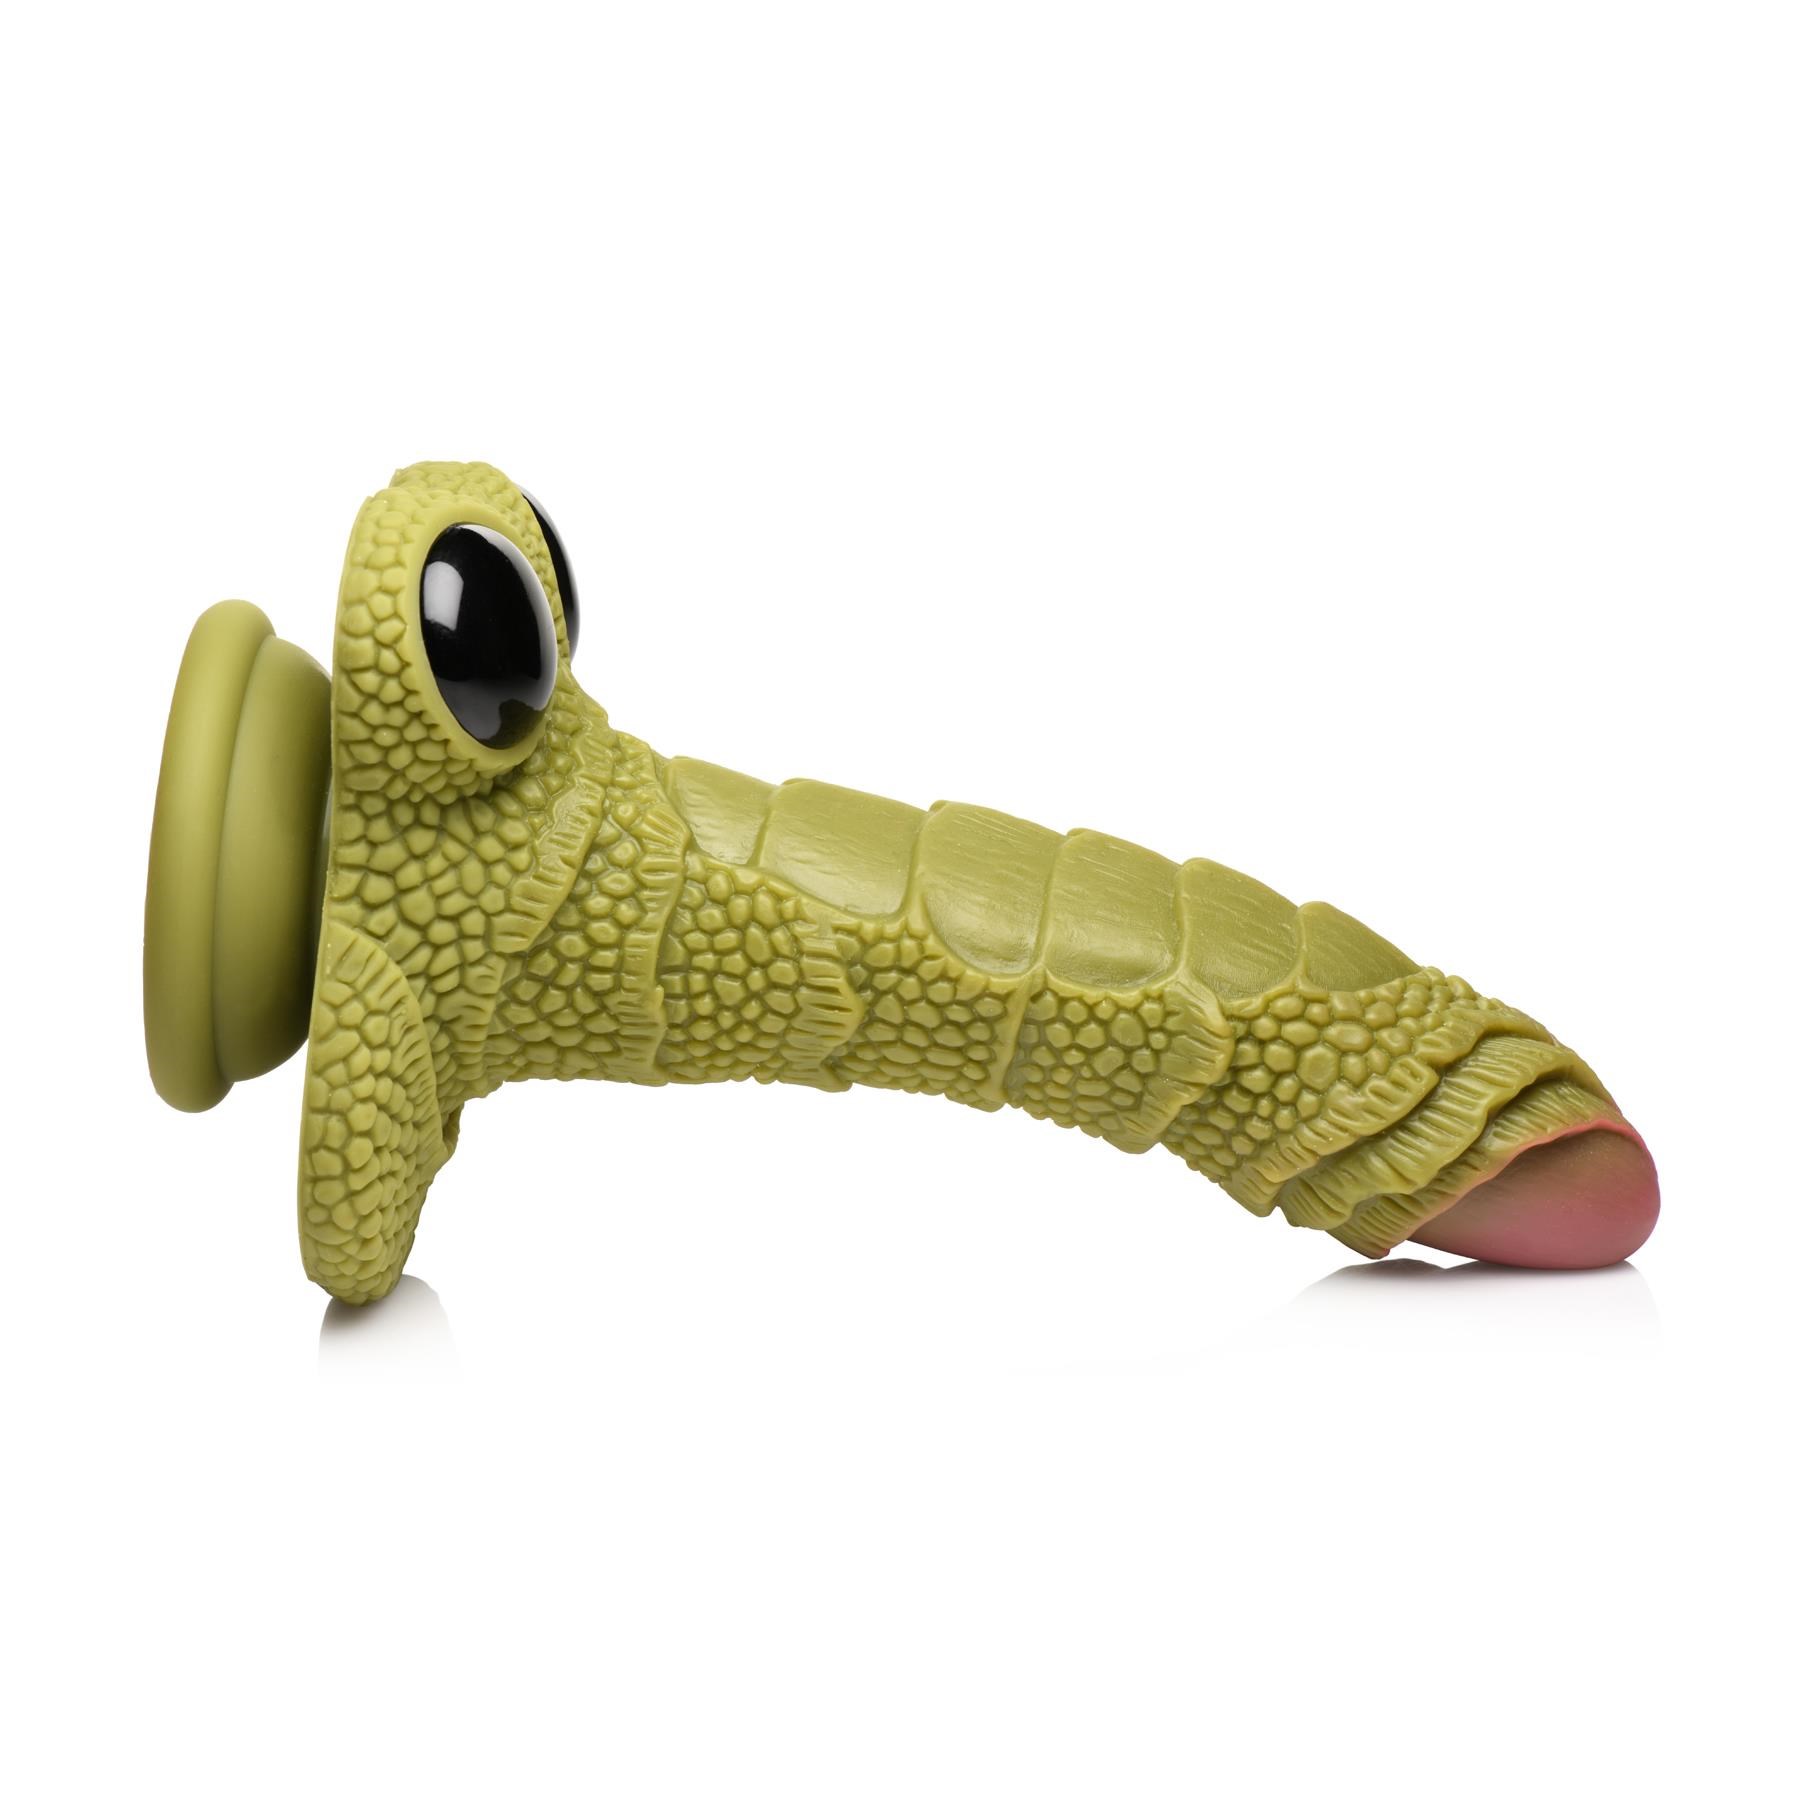 CreatureCocks Swamp Monster Scaly Dildo - Product Shot #6